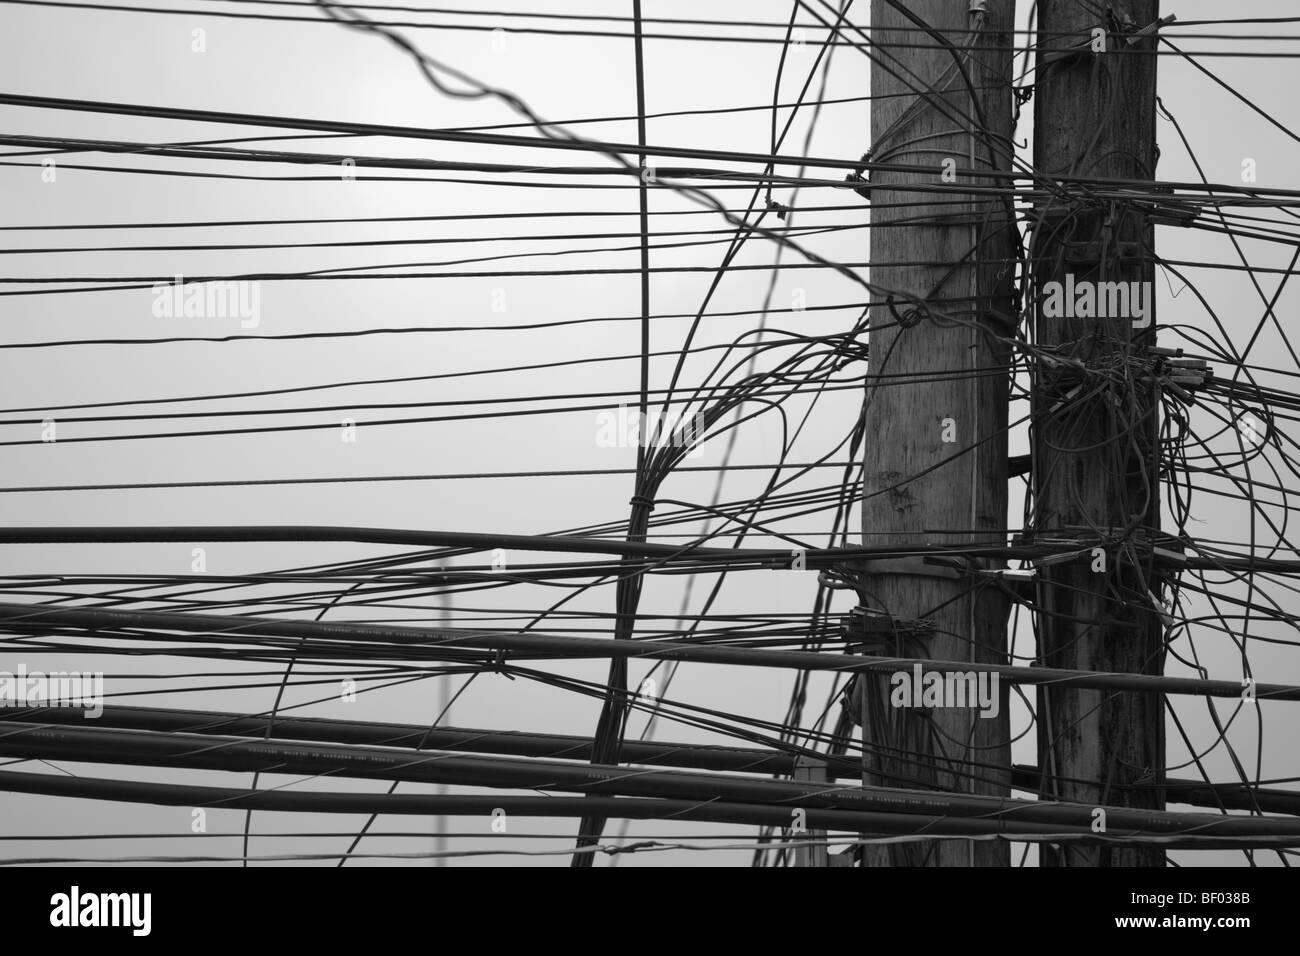 Tangled telephone and power lines on telegraph poles. Passi City Iloilo Philippines Stock Photo